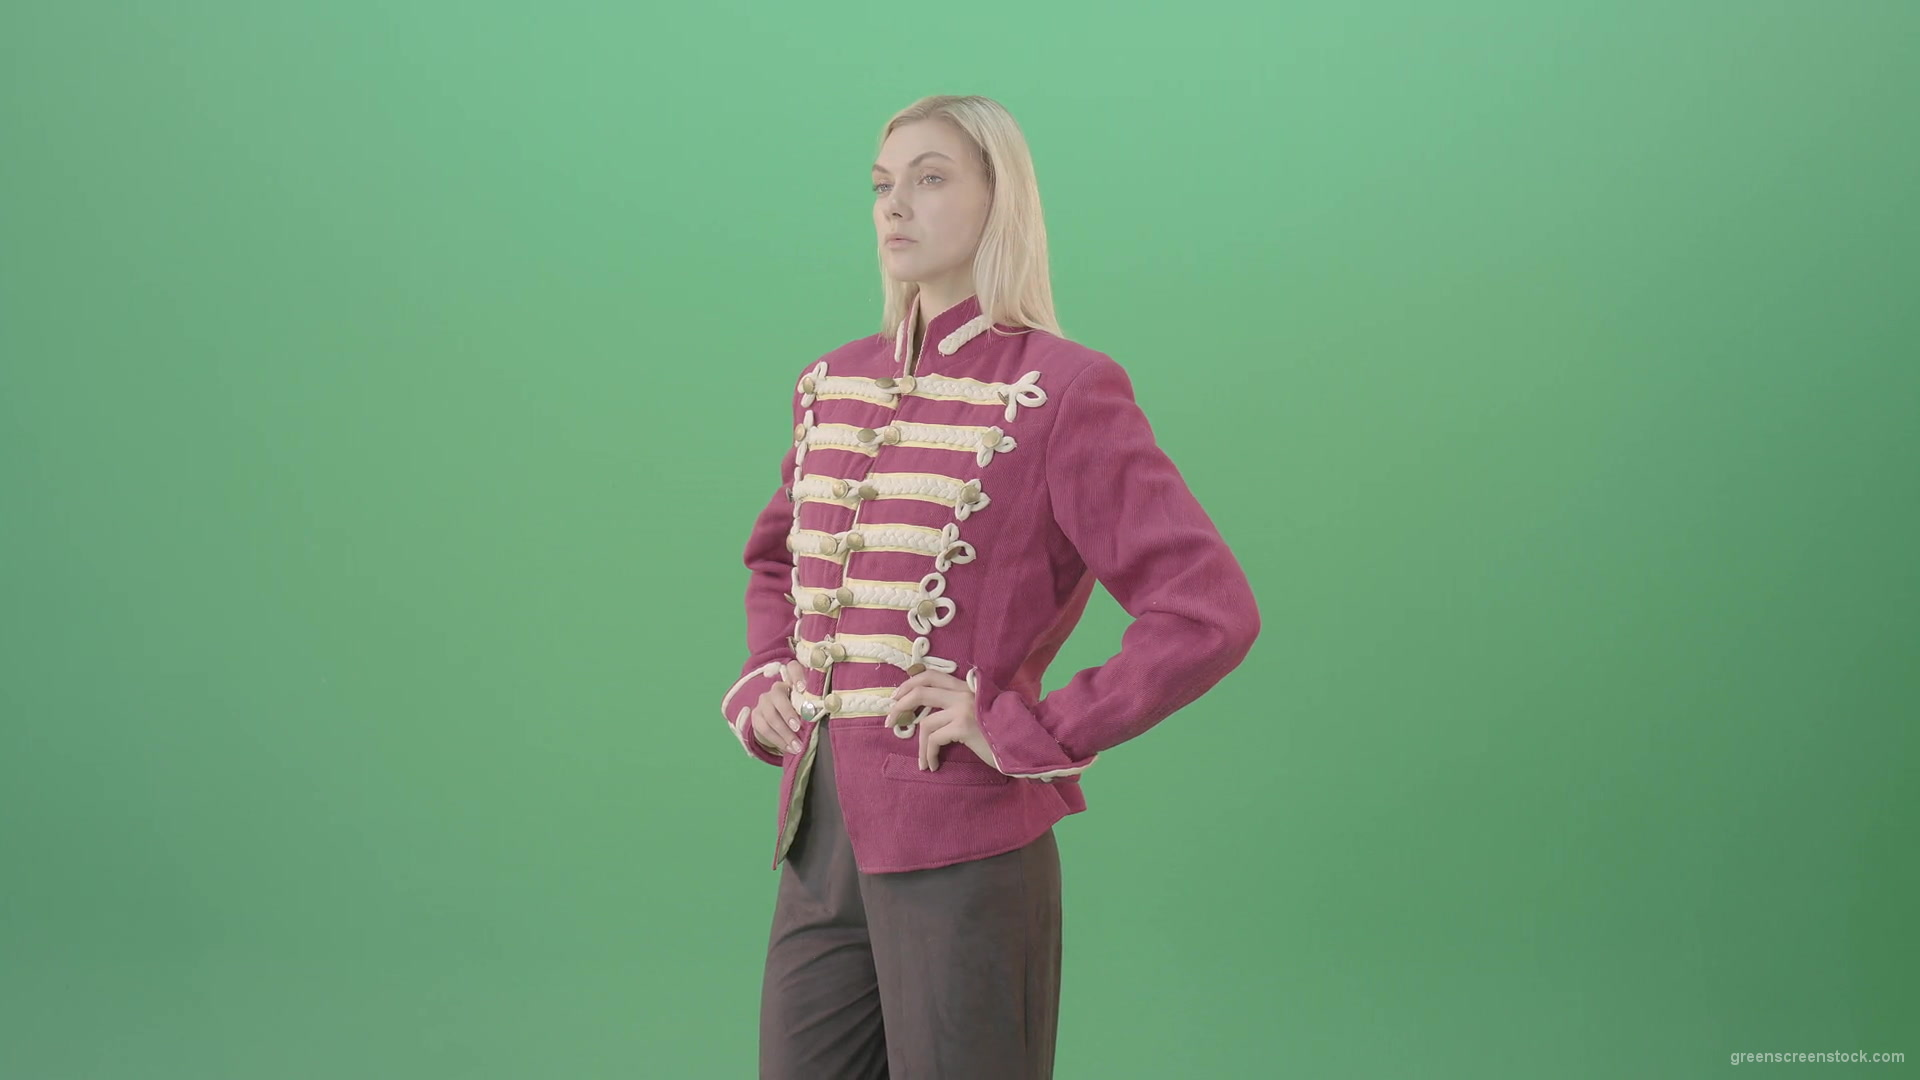 Blonde-Girl-in-Imperial-Royal-uniform-posing-and-shows-photomodel-gestures-isolated-on-Green-Screen-4K-Video-Footage-1920_009 Green Screen Stock